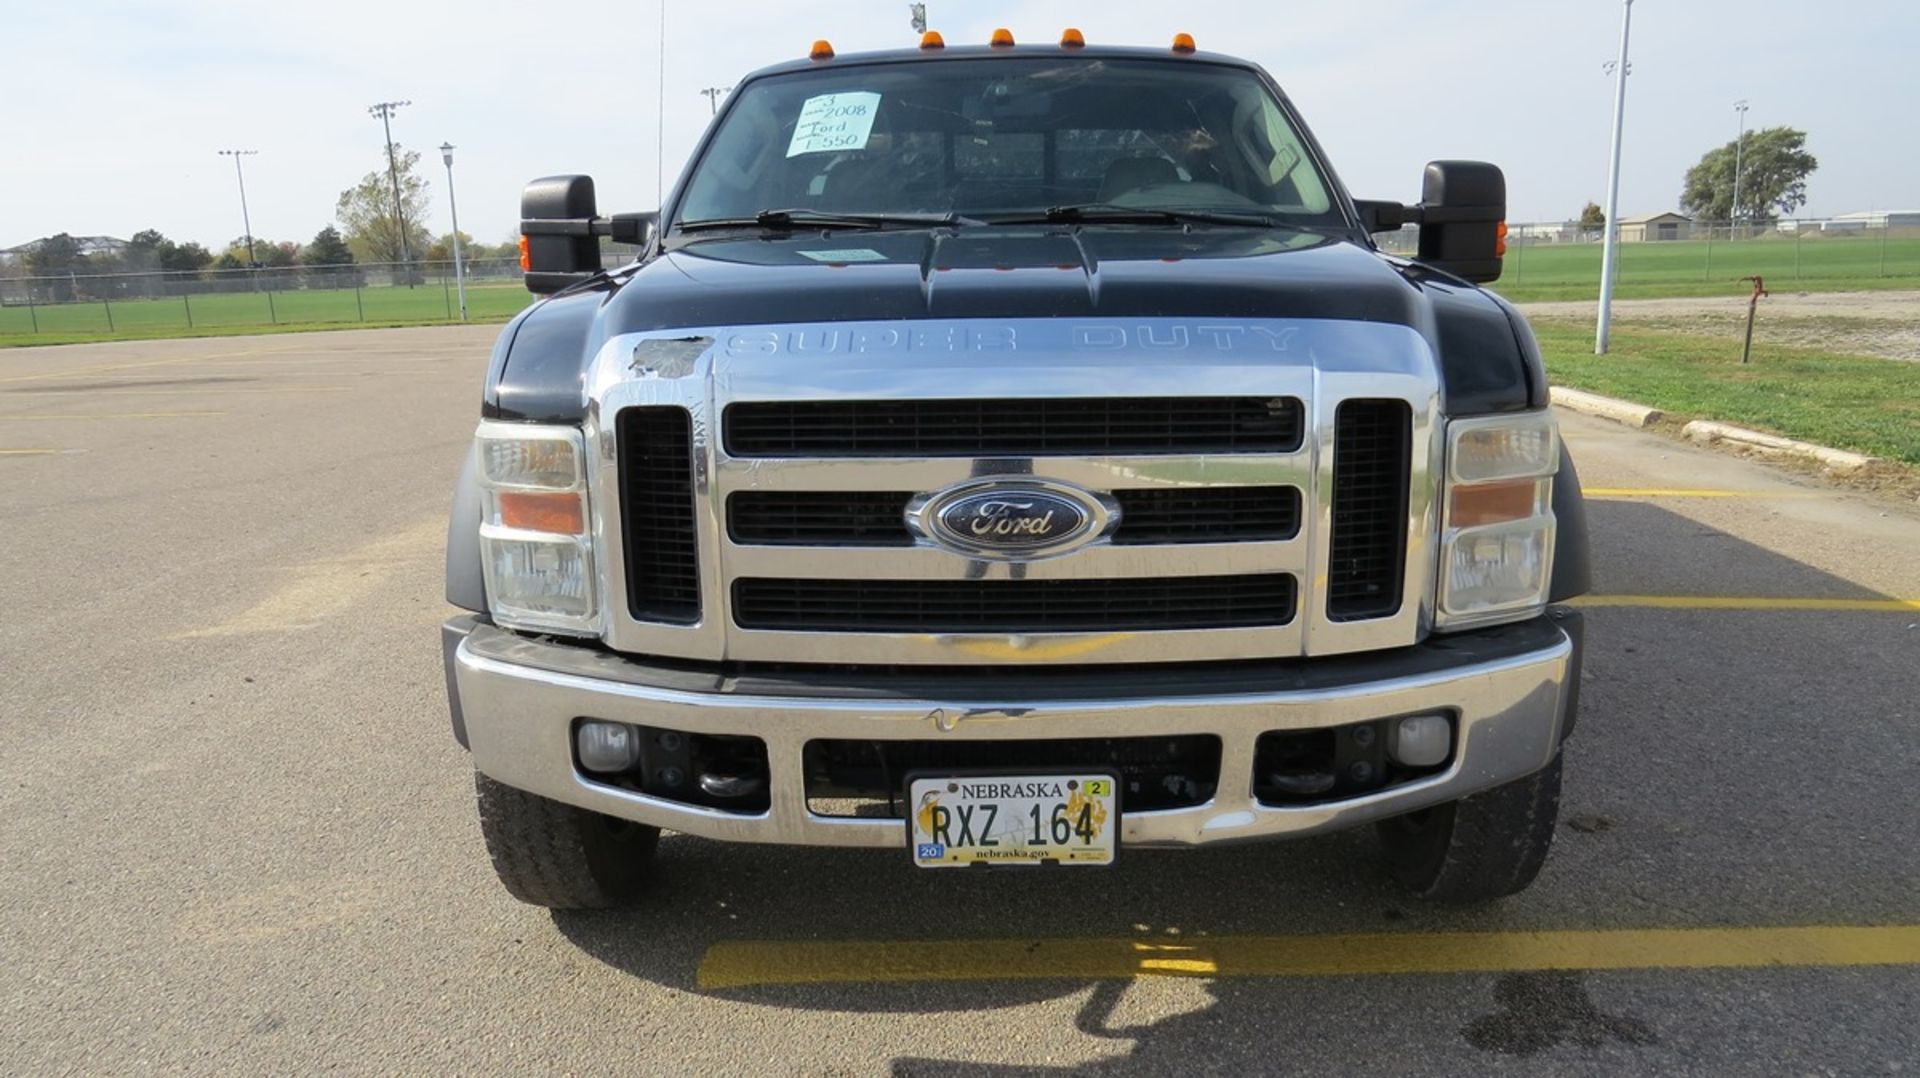 2008 Ford Model F-550 Lariat Extended Cab 4x4 Diesel 1-Ton Dually Pickup, VIN# ED26416, 6.4 Liter - Image 5 of 43